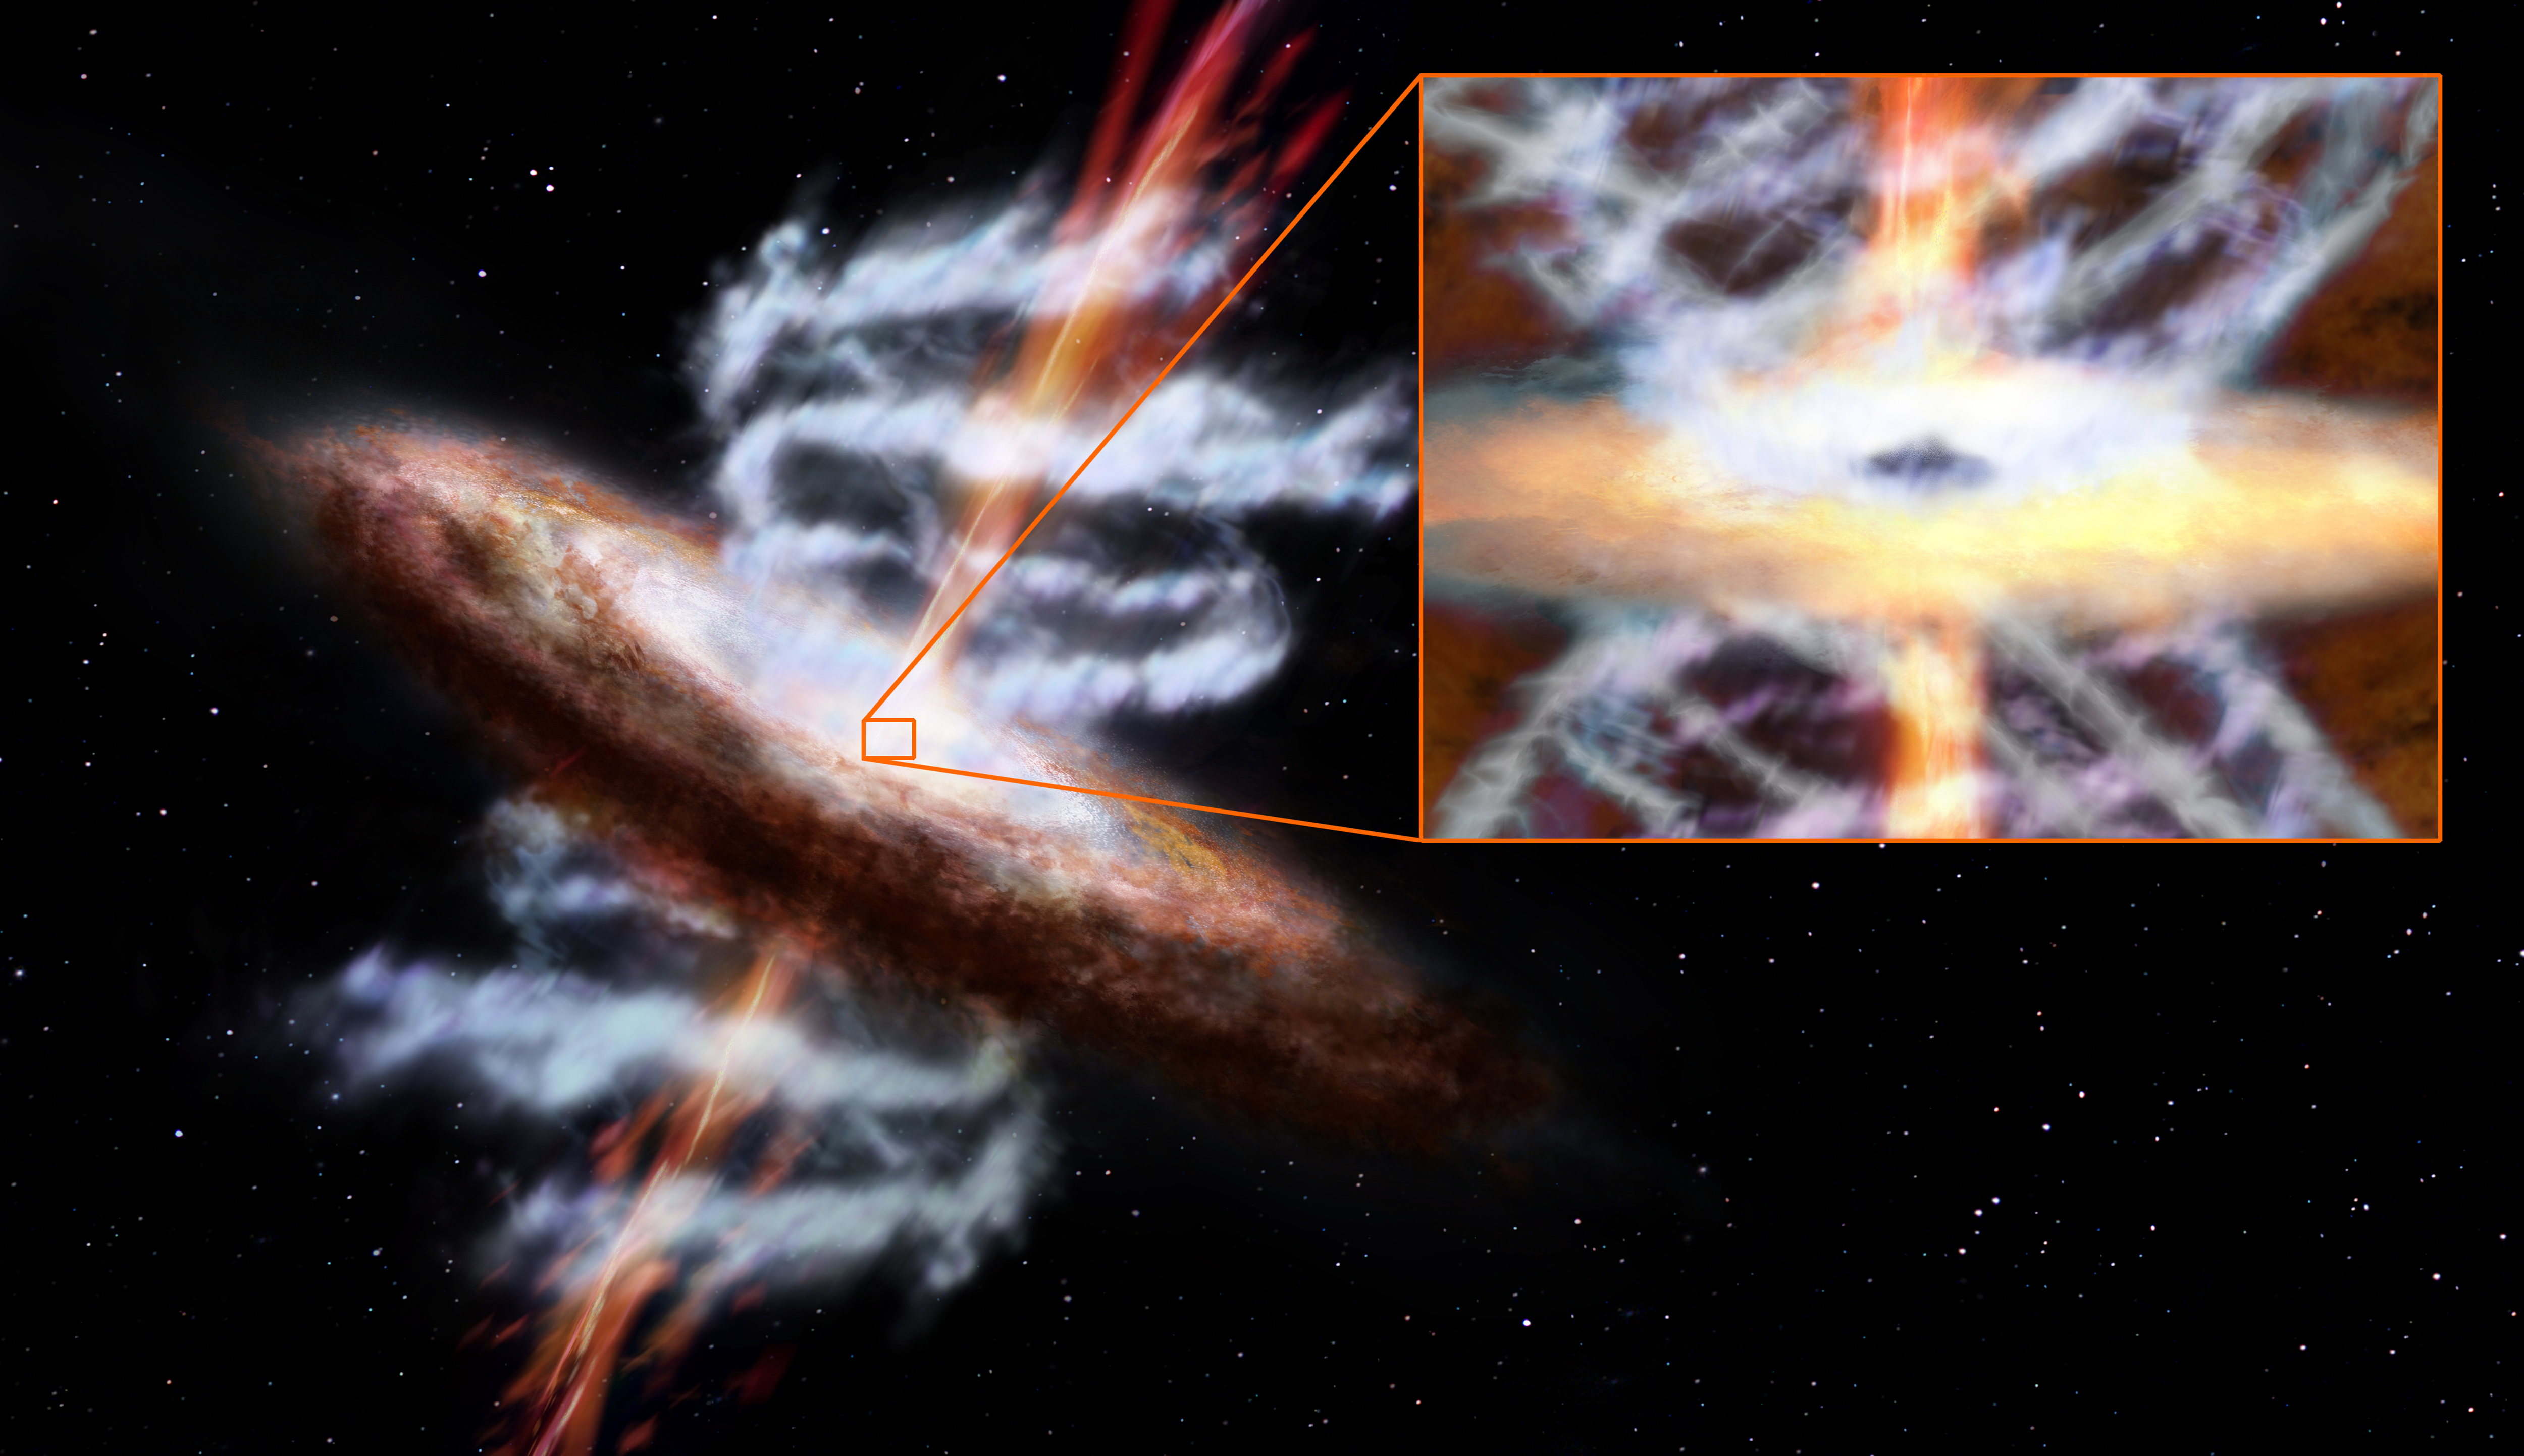 The supermassive black holes in active galaxies can produce narrow particle jets (orange) and wider streams of gas (blue-gray) known as ultra-fast outflows, which are powerful enough to regulate both star formation in the wider galaxy and the growth of the black hole. Inset: A close-up of the black hole and its accretion disk.